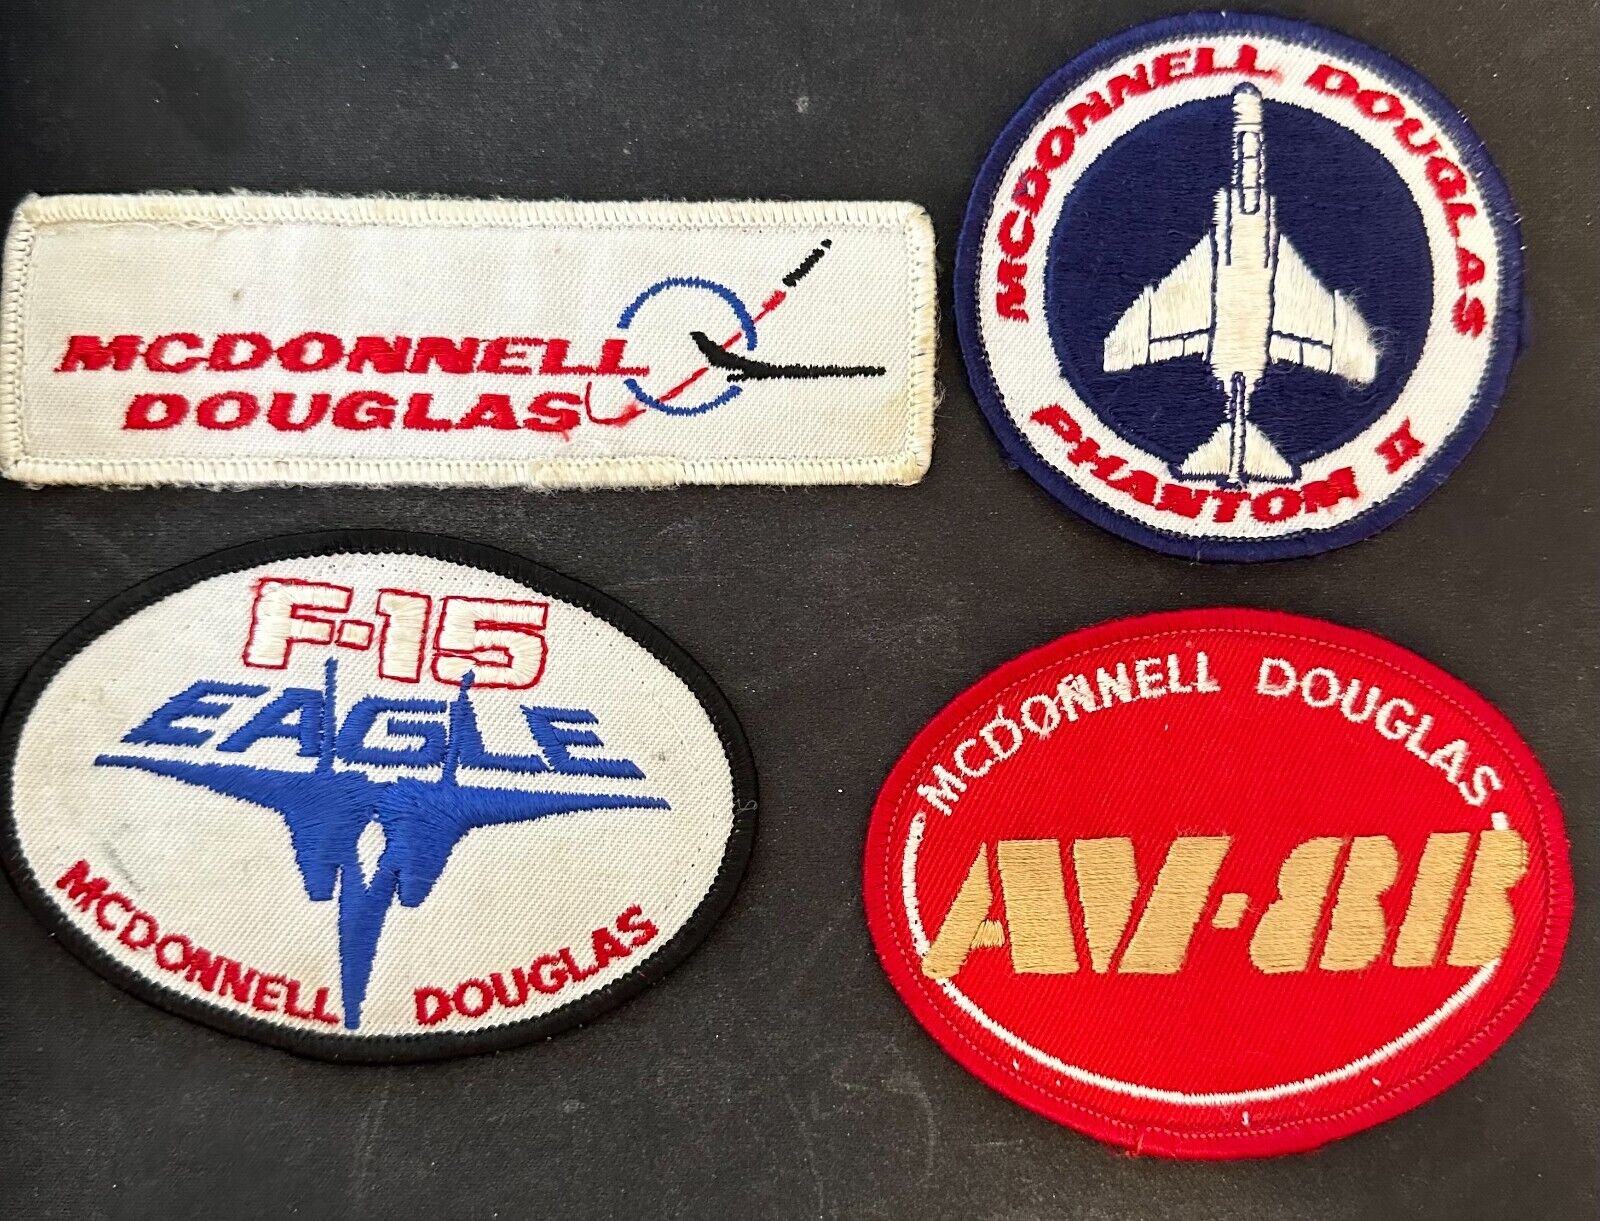 Vintage McDonnell Douglas (Boeing) Embroidered Patches (4)